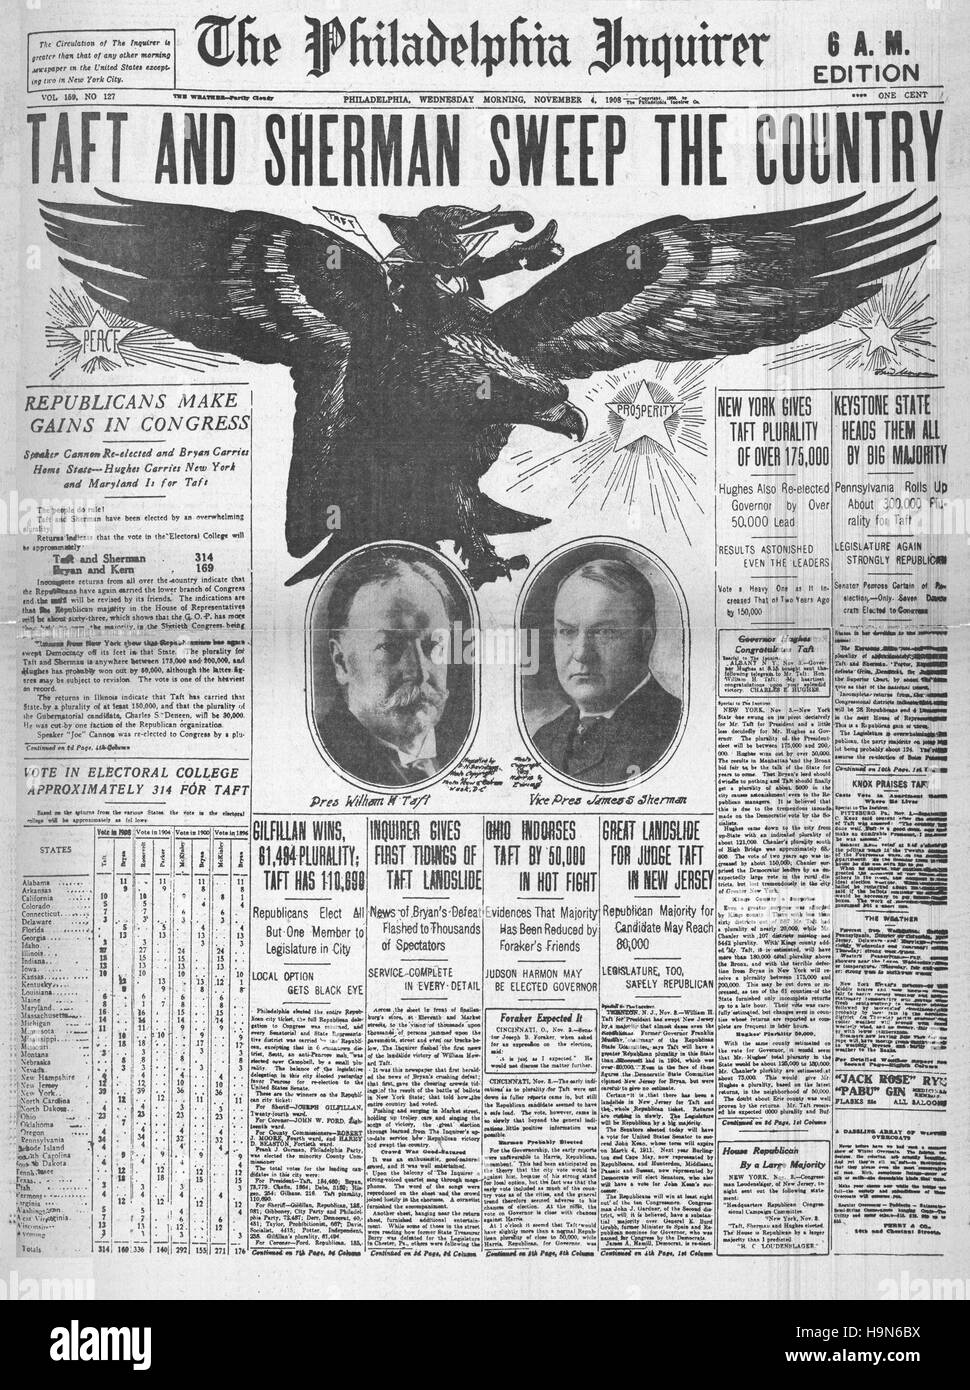 1908 Philadelphia Inquirer William Taft elected 27th President of the United States Stock Photo